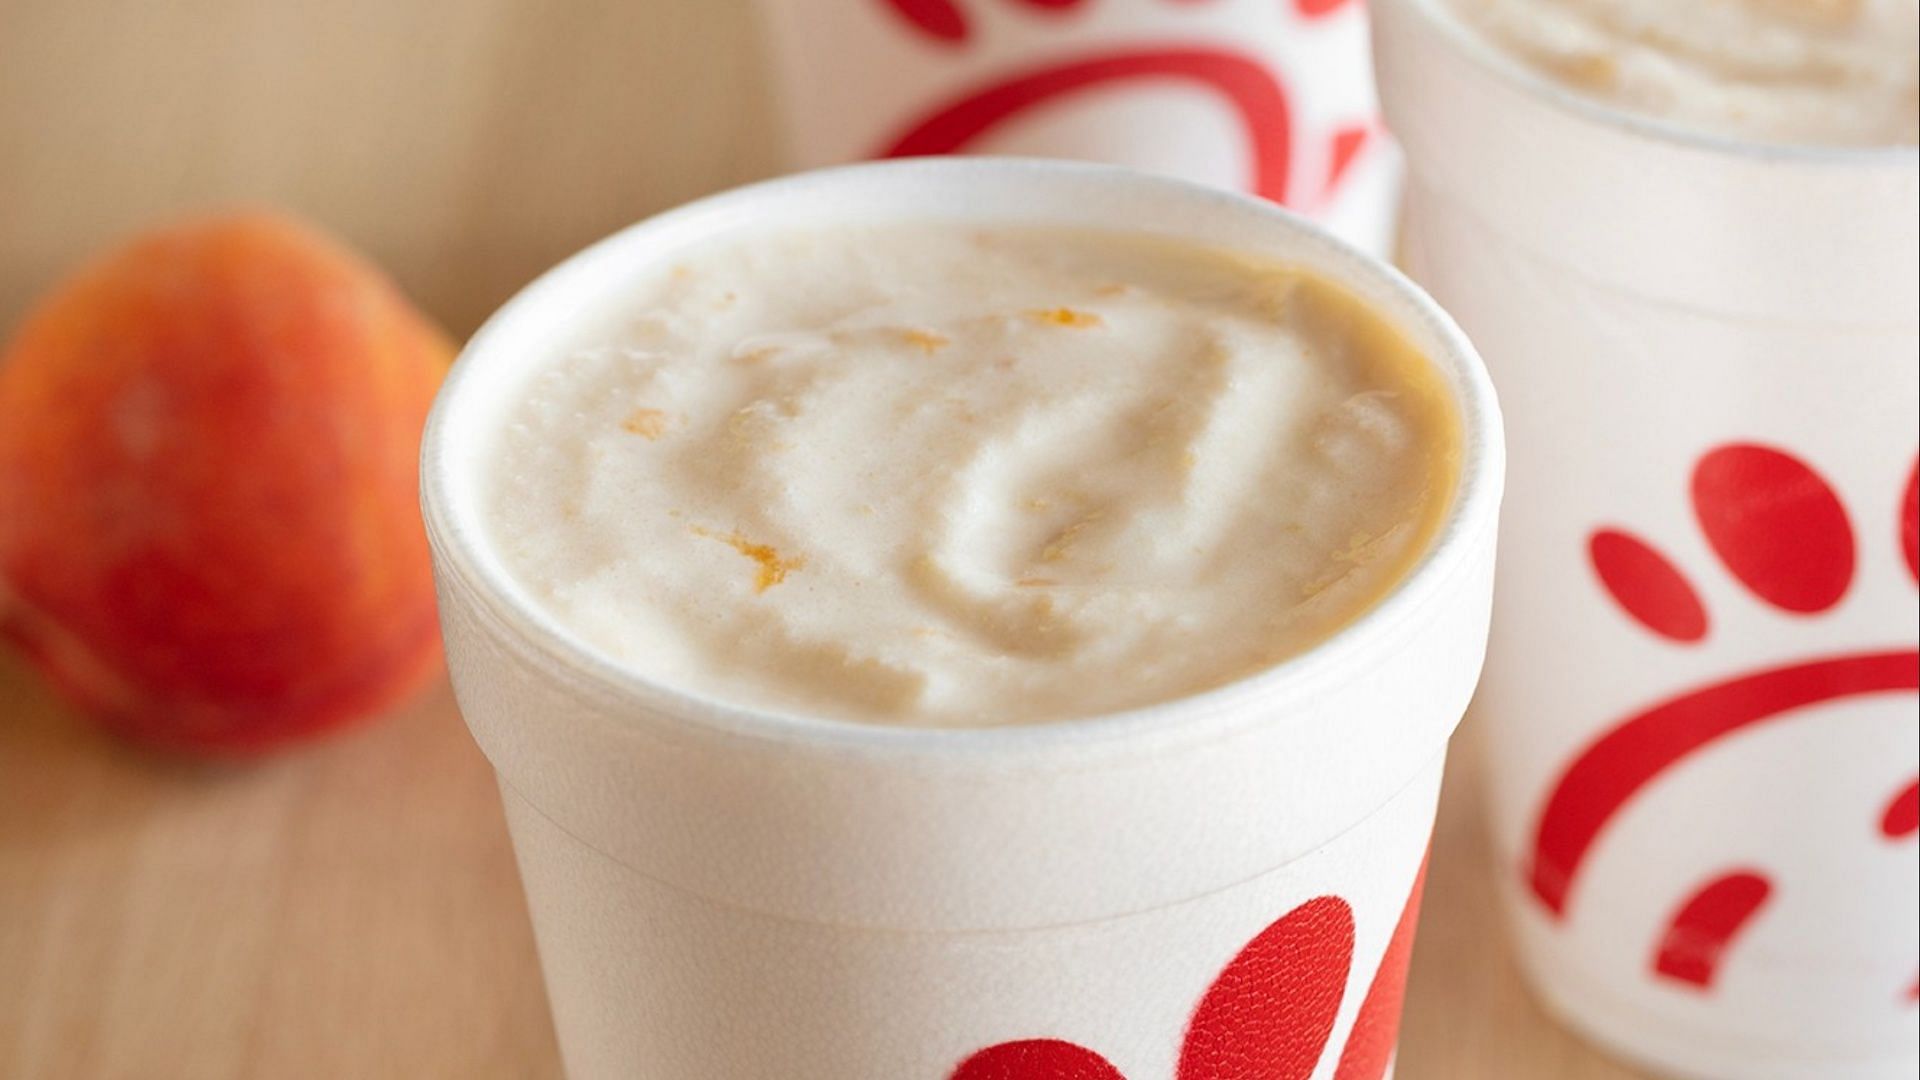 The Peach Milkshake will be available on the menu until August 26, 2023 (Image via Chick-Fil-A)